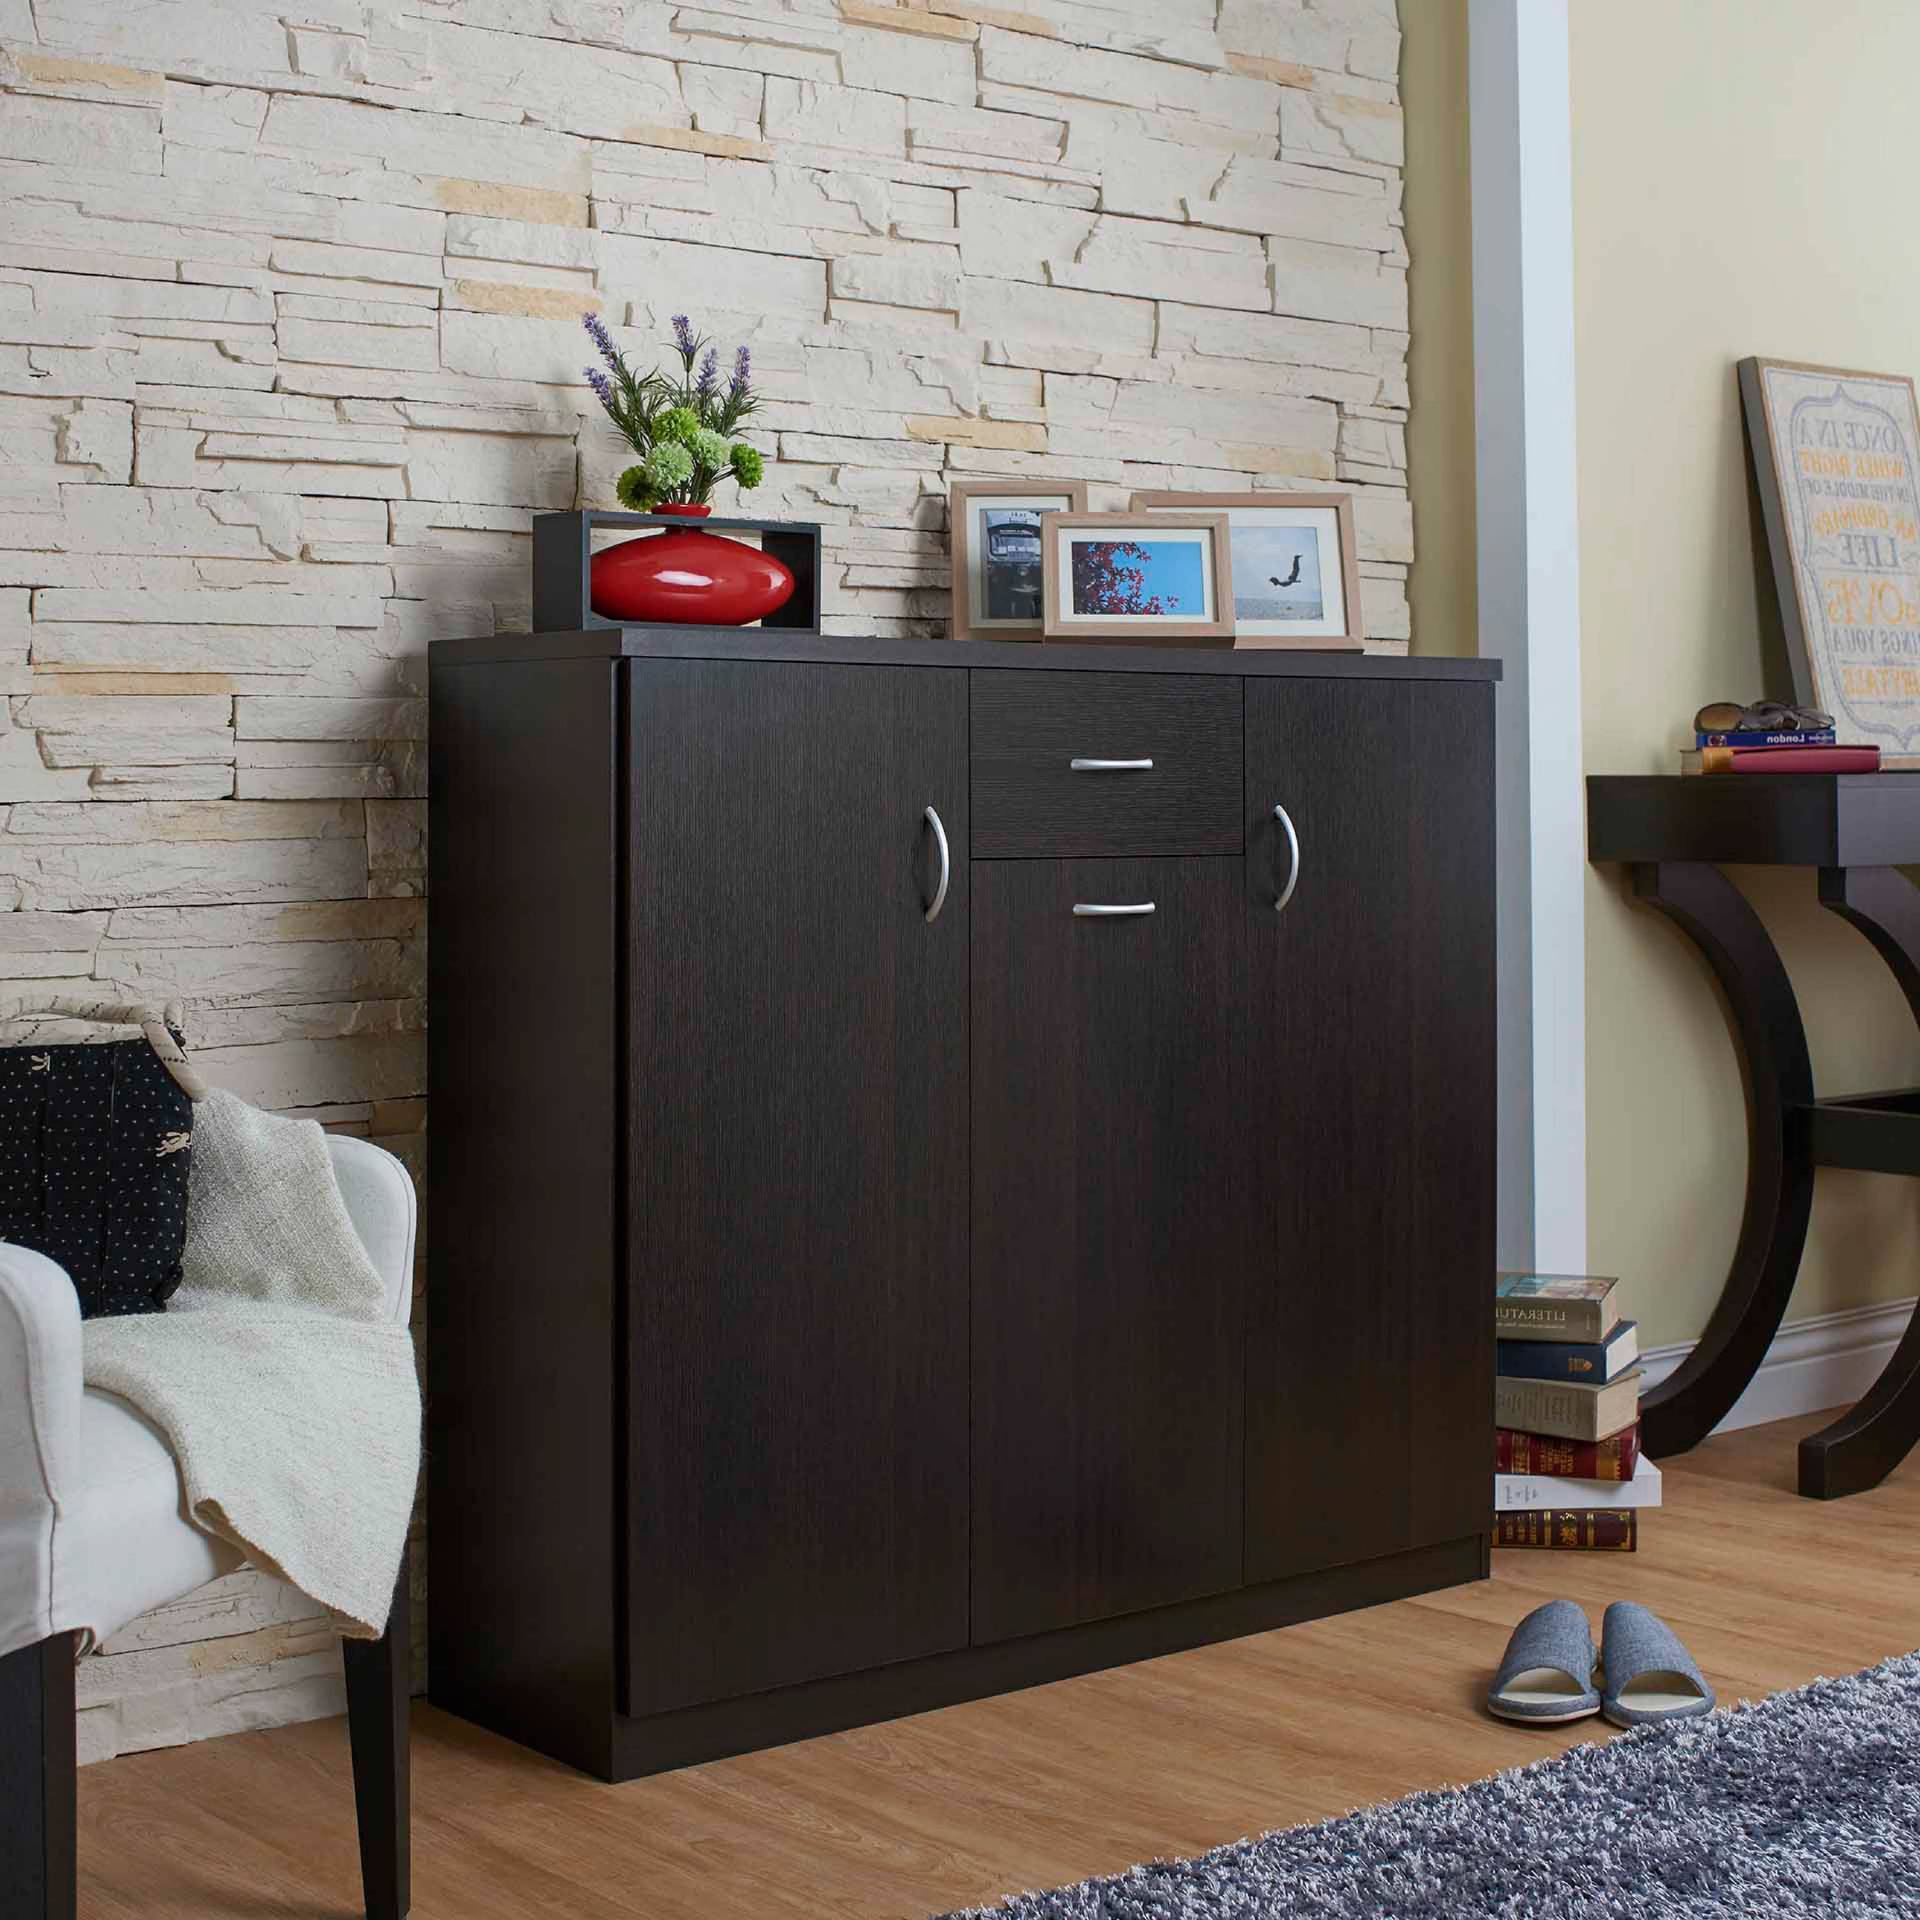 A drawer, laminated storage space, handle a special shape, entrance, dark brown.